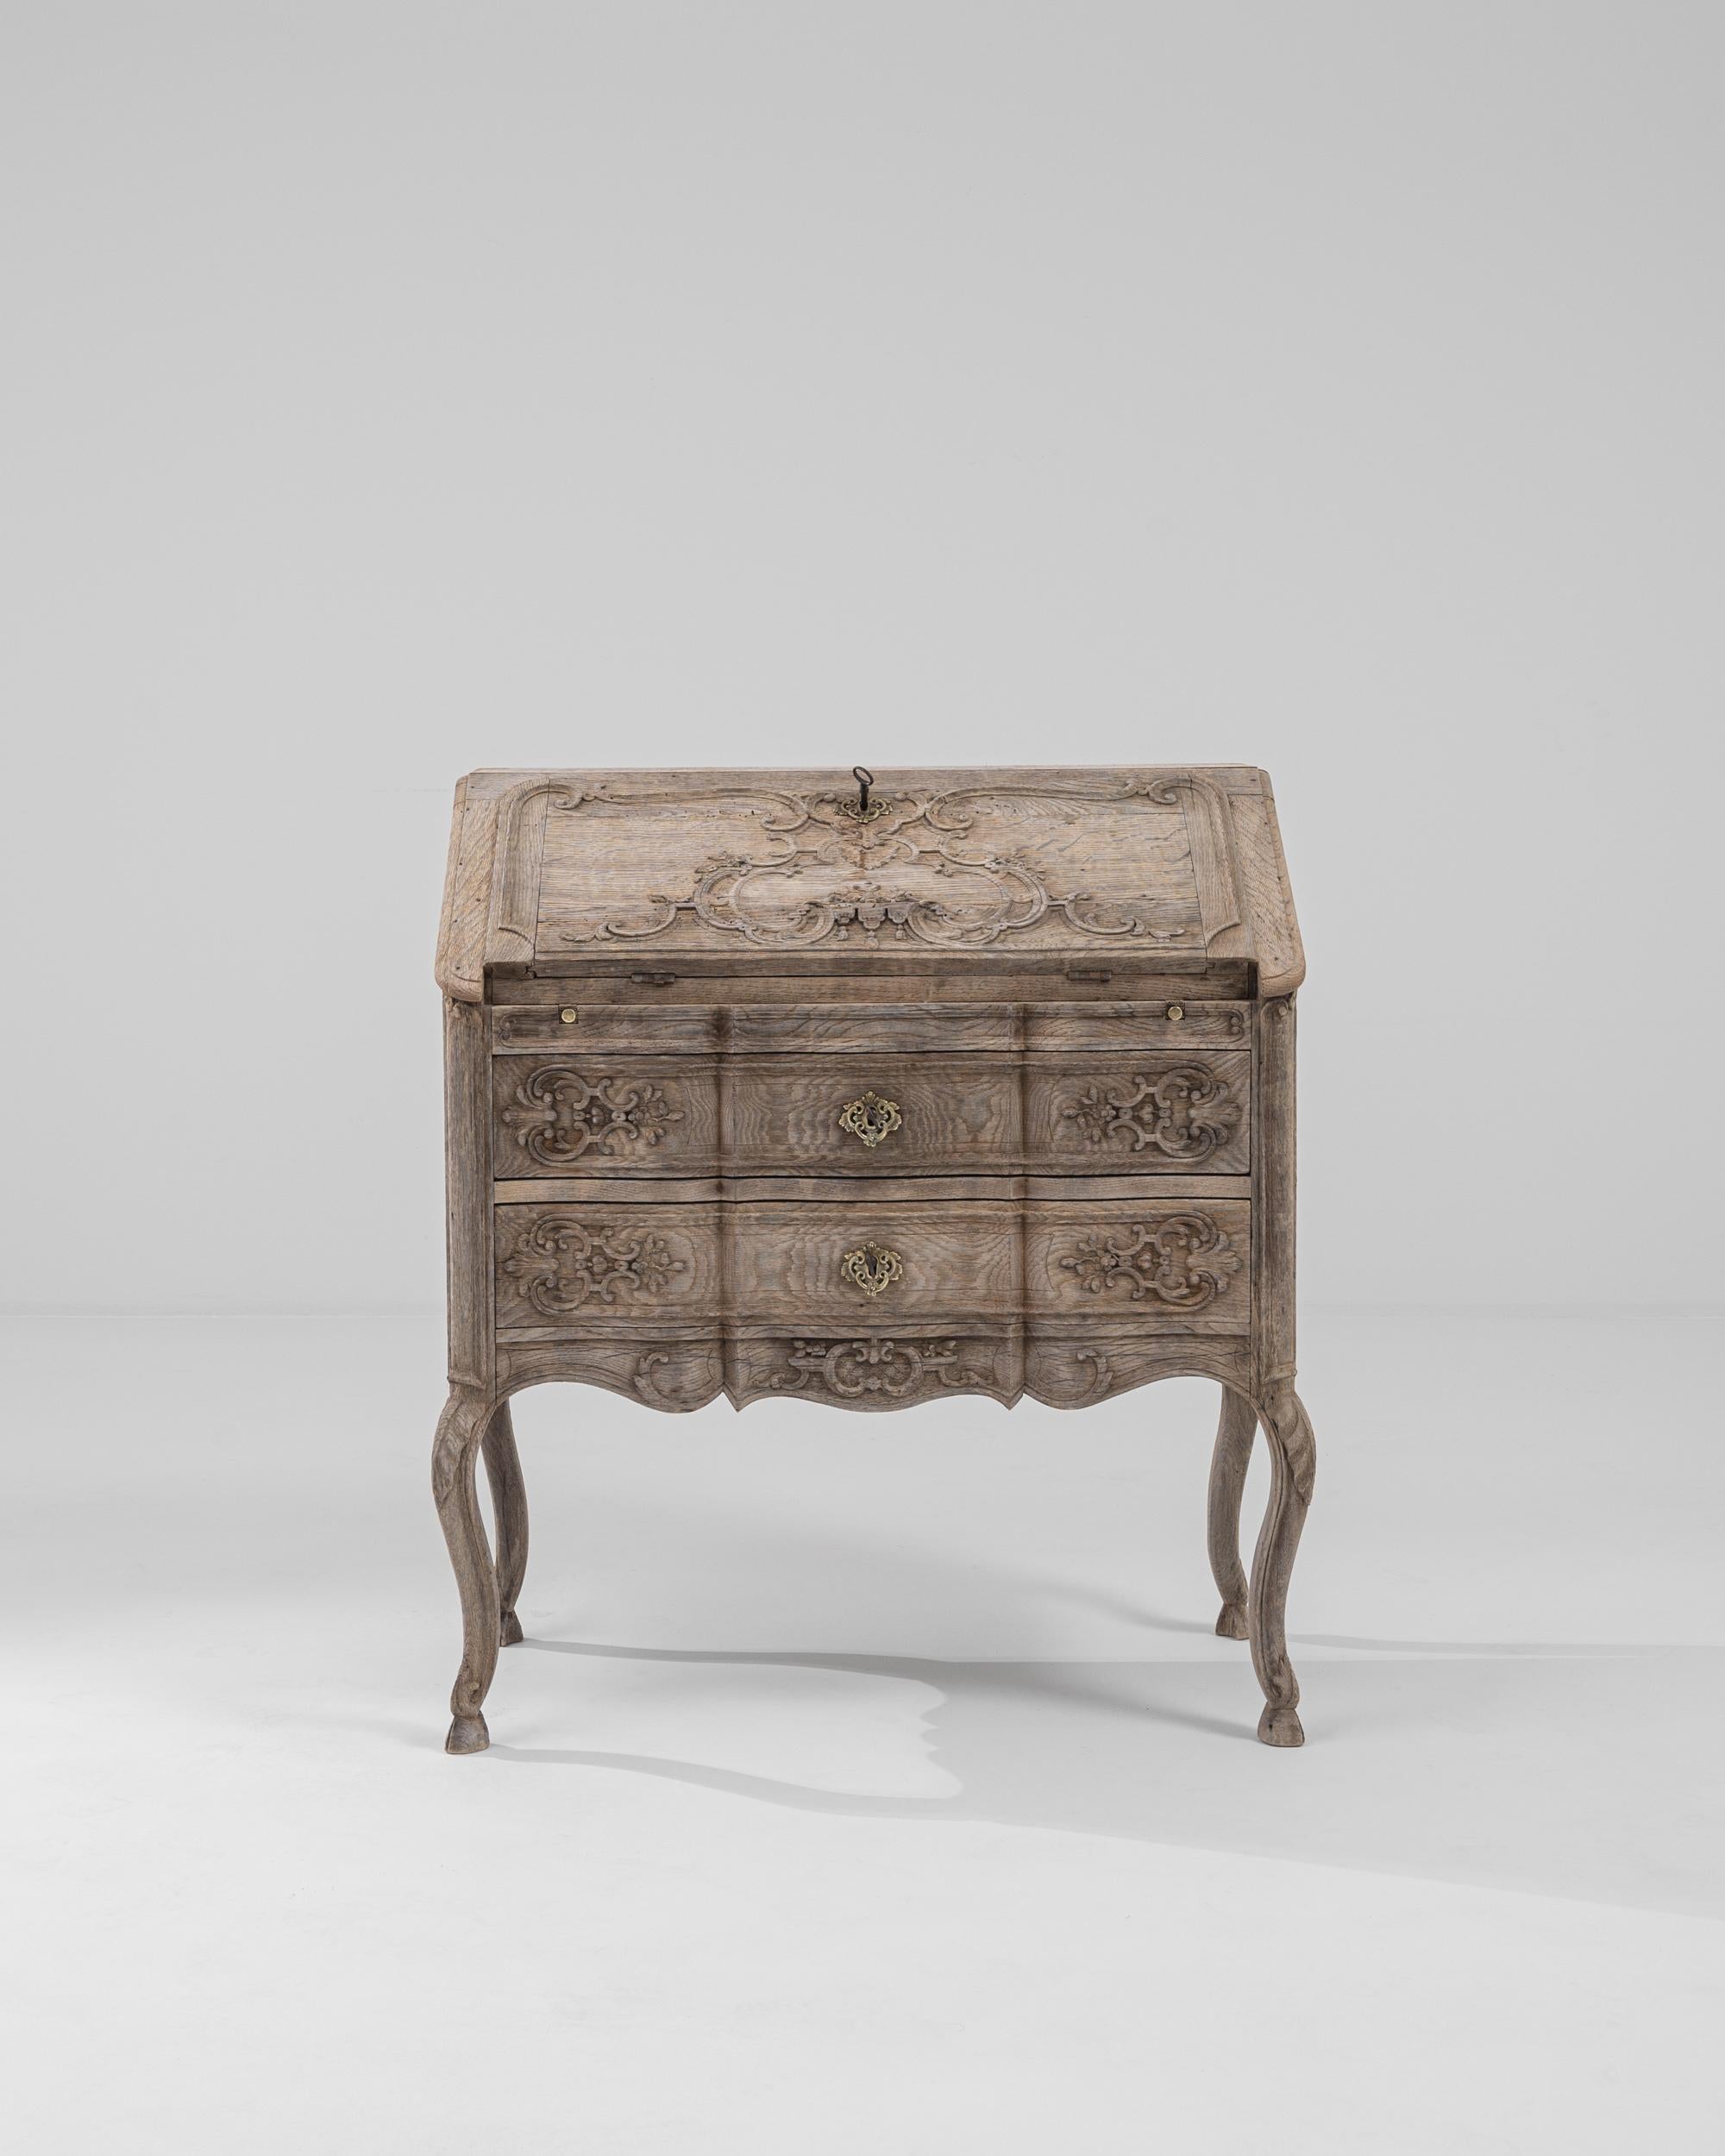 Made in France at the turn of the century, this beautiful writing desk in natural oak takes inspiration from the ornate escritoires of previous centuries—from the serpentine shape of the cabinet to the elaborate carved relief of the paneling. Regal